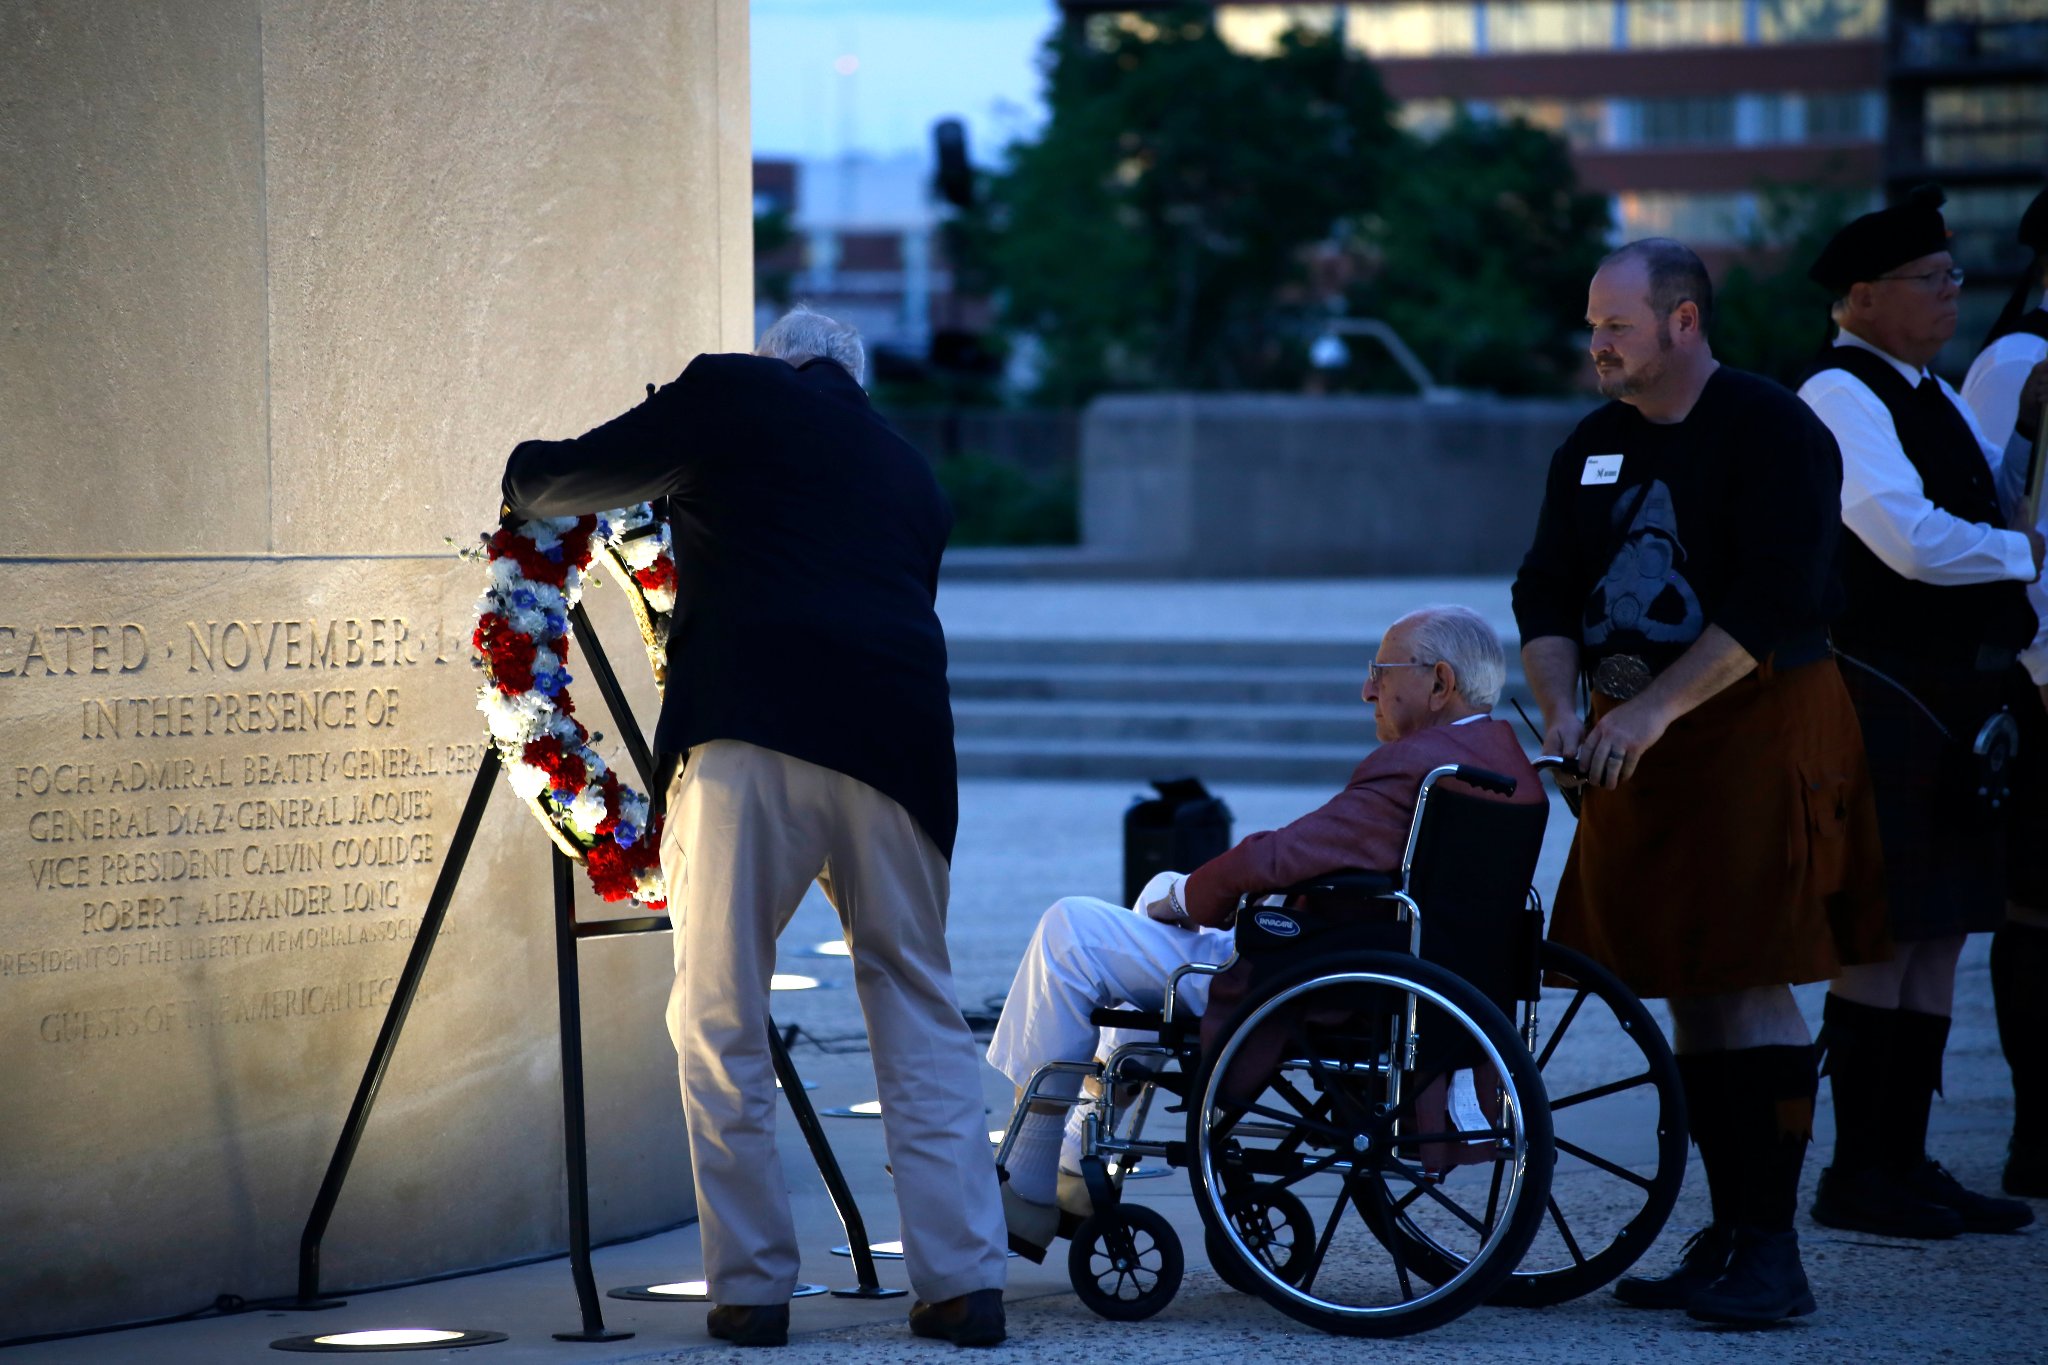 Modern photograph of the base of the Liberty Memorial Tower at twilight. A person in a dark jacket places a large floral wreath on a stand. Next to them, an older person observes while seated in a wheelchair being pushed by a man wearing a kilt.